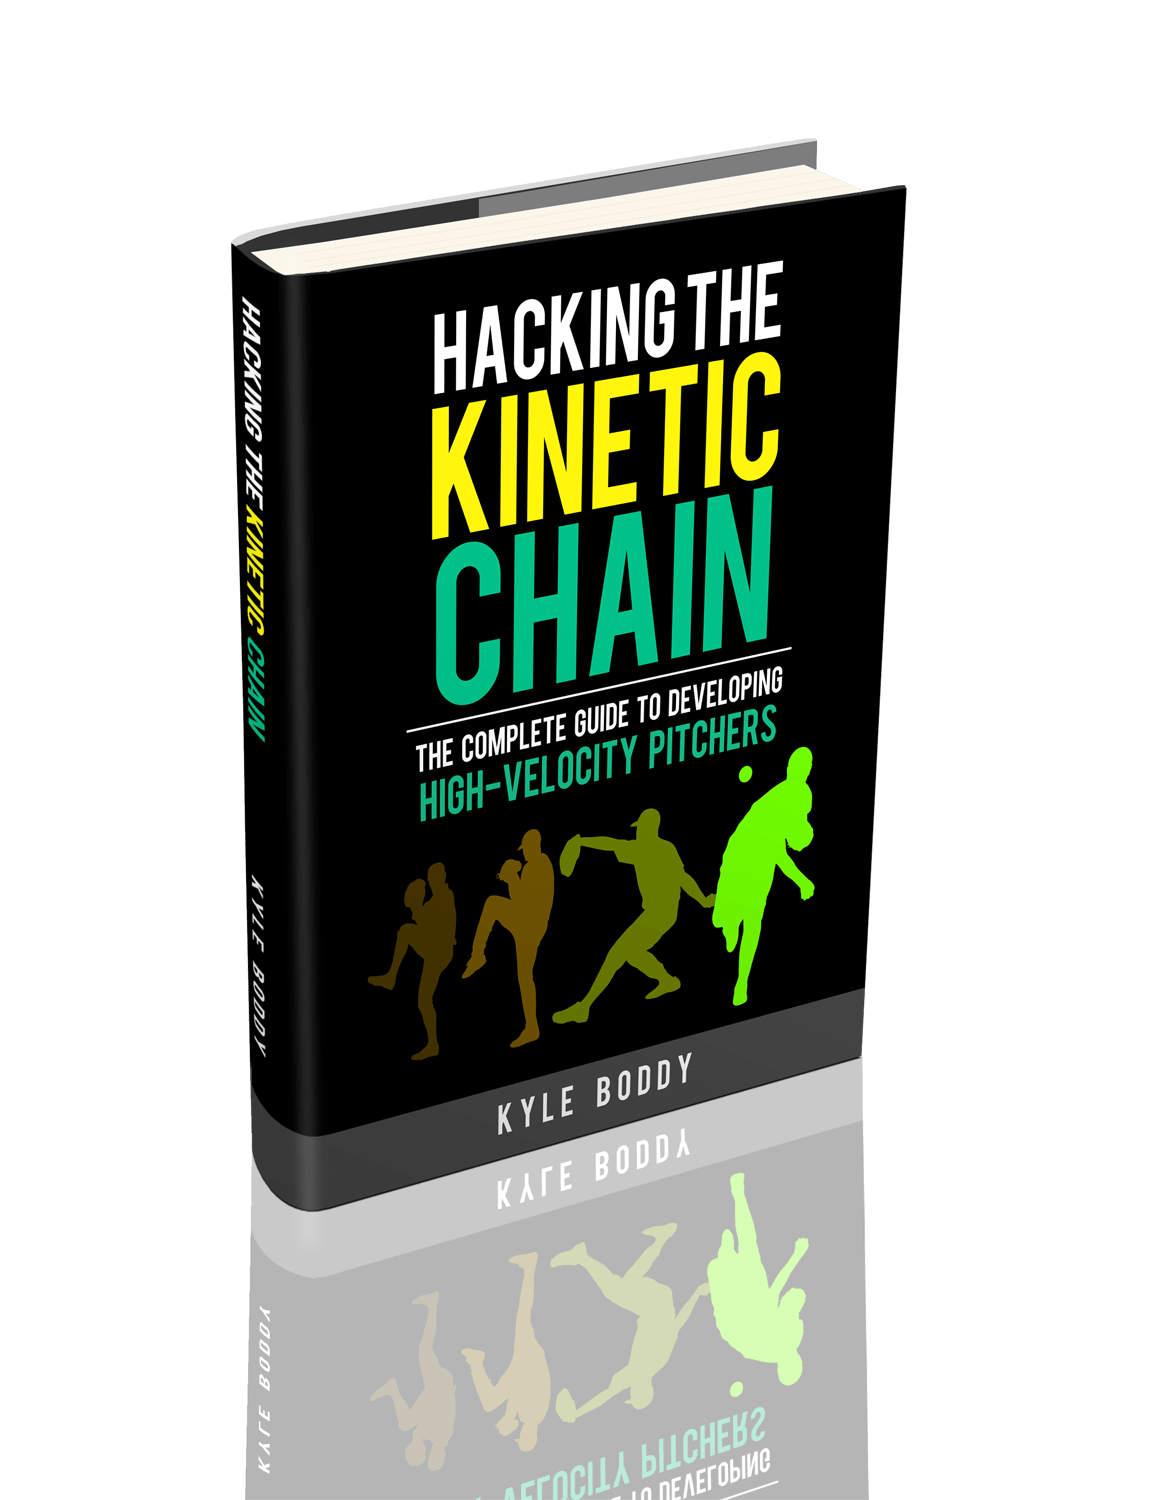 Hacking the Kinetic Chain